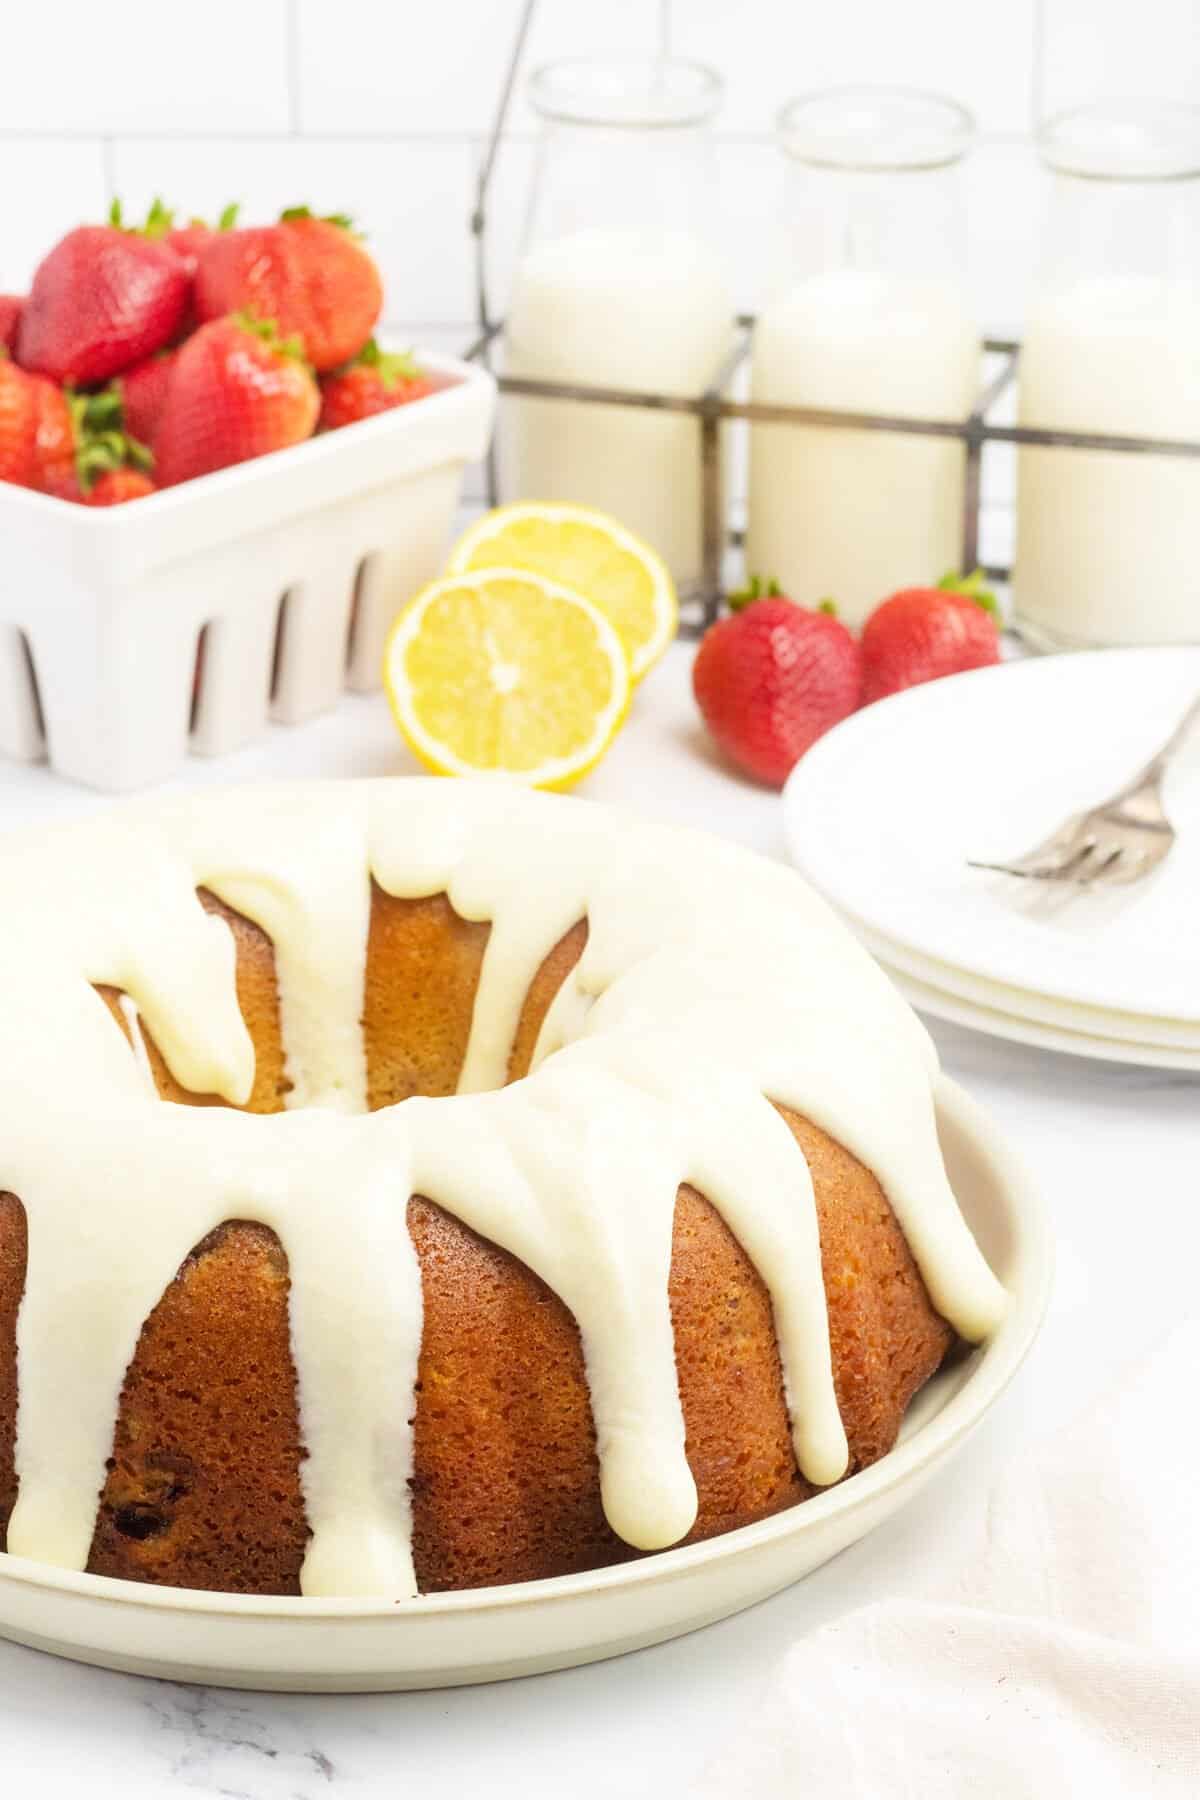 Strawberry Bundt Cake with lemon icings drizzled on top